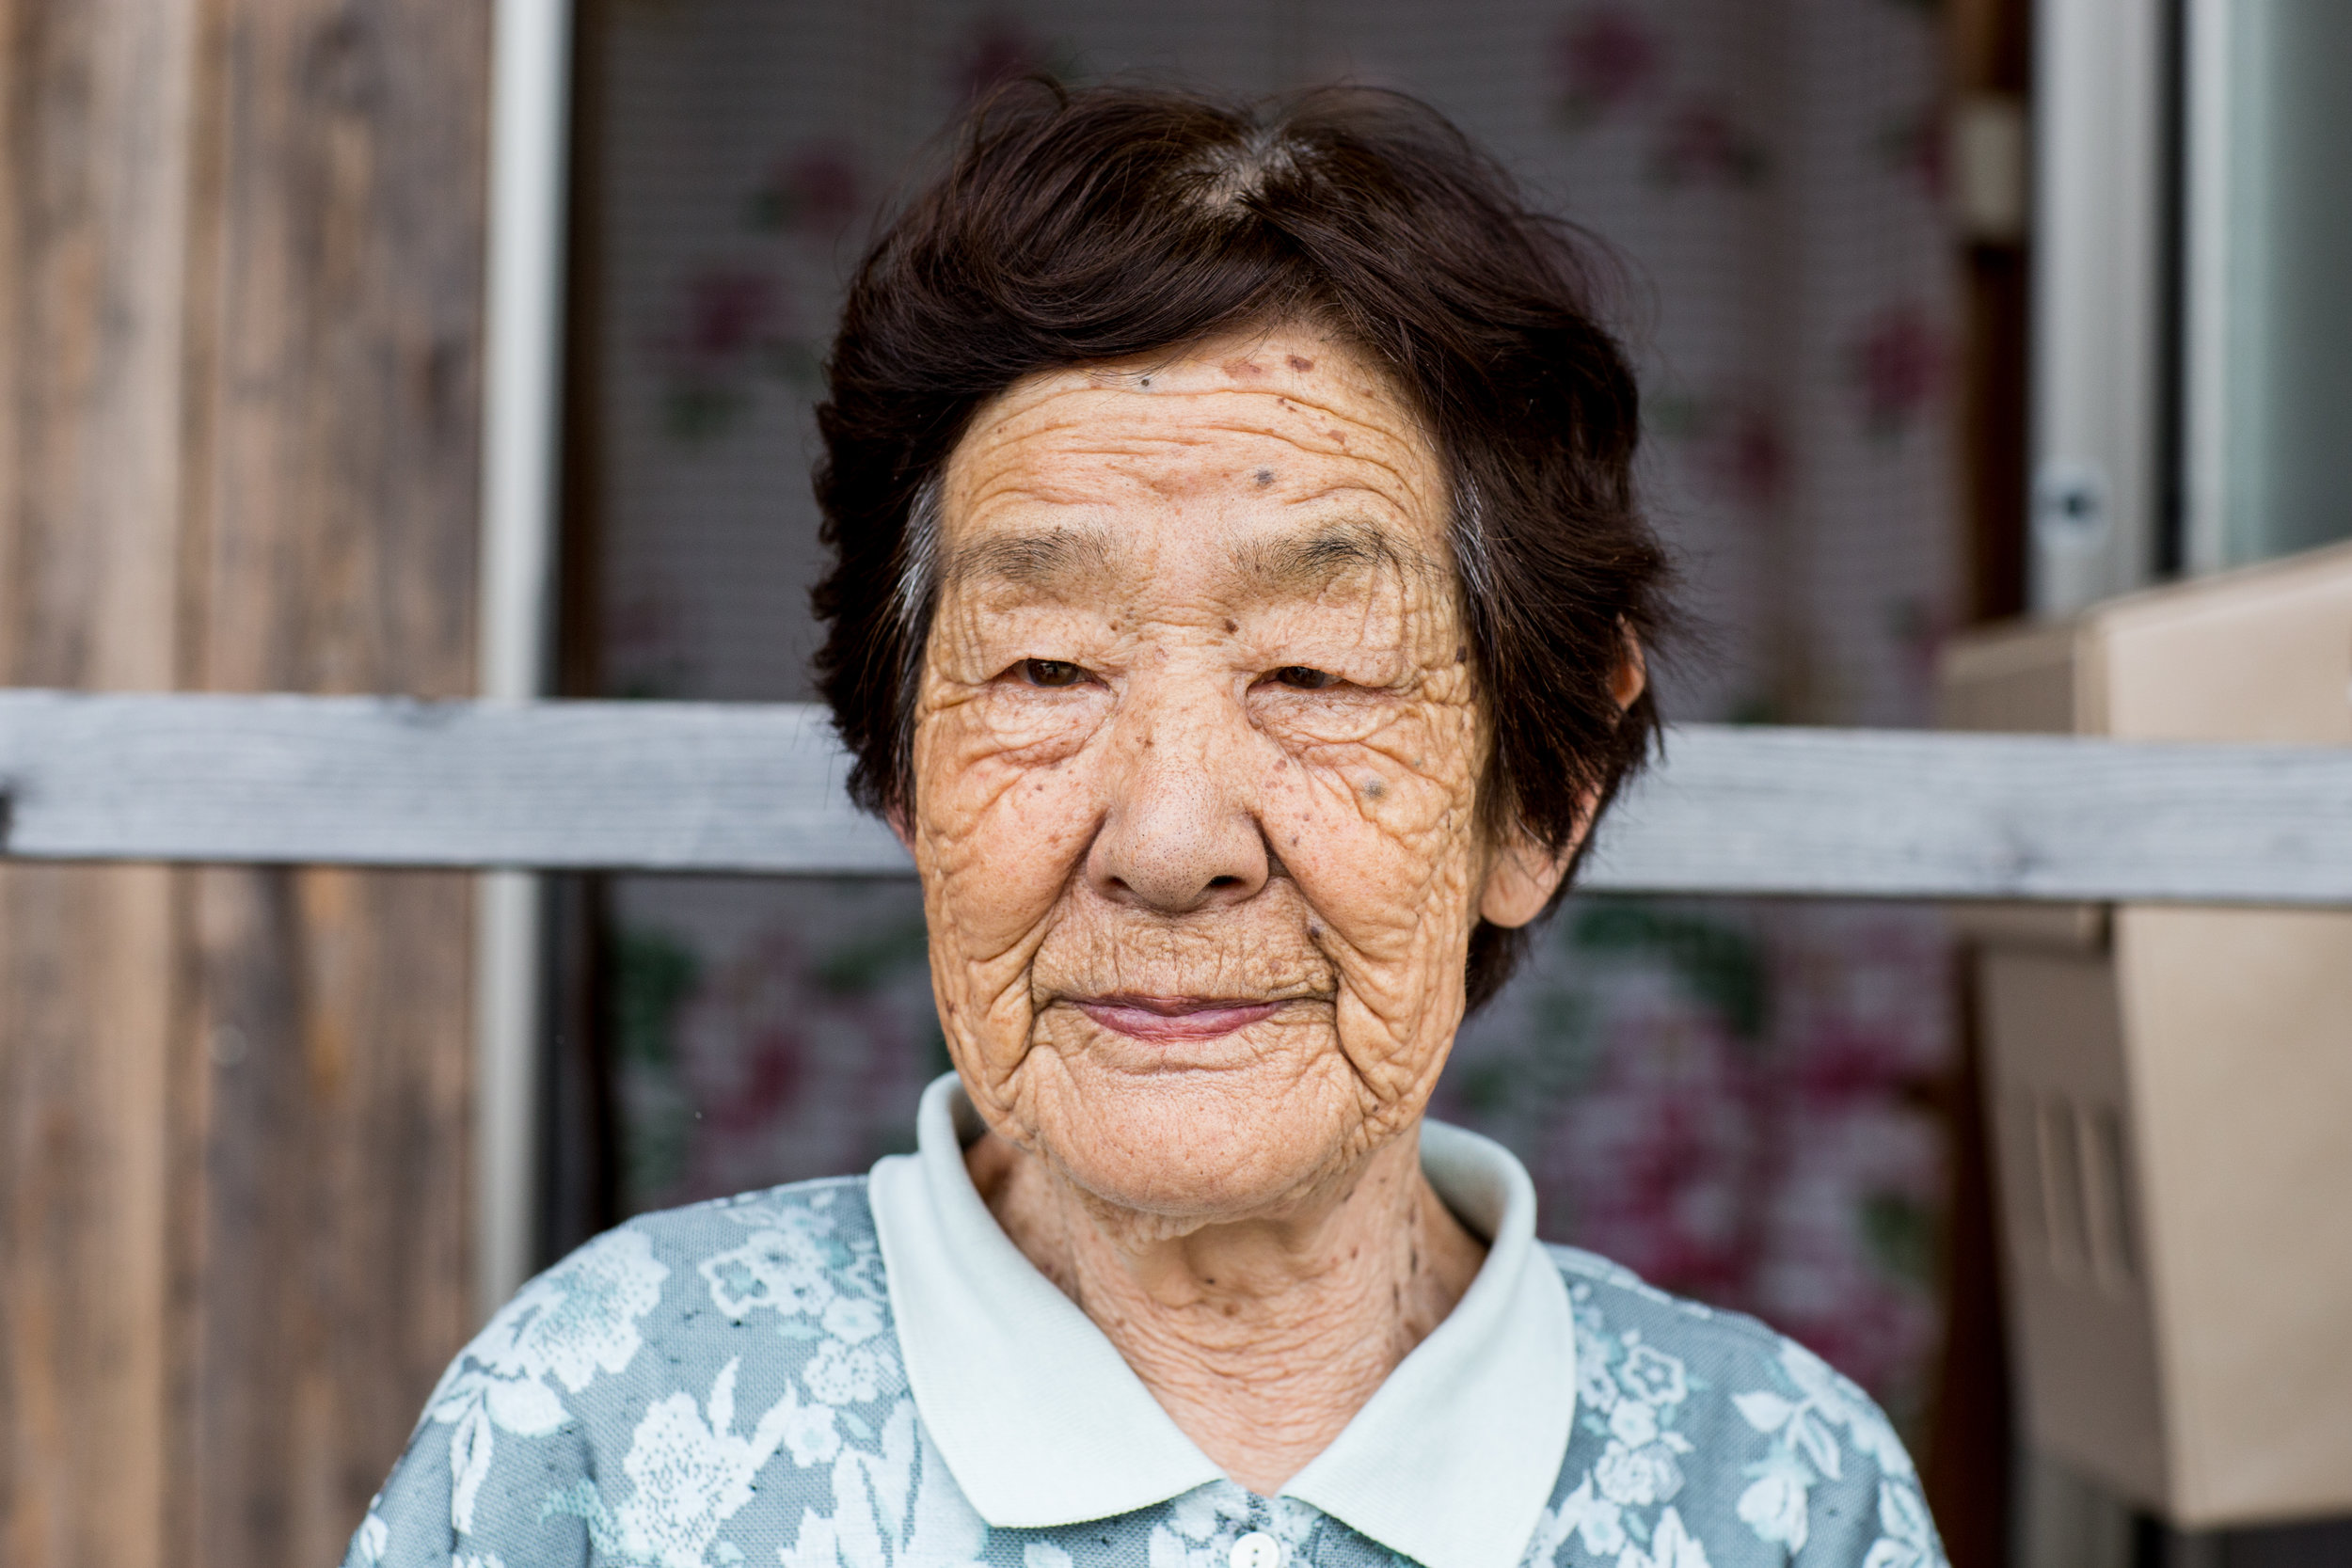  Kiyoko Shiga, 88, and her two children, were forced to evacuate from their home in Naraha when the Fukushima Daiichi Nuclear Power Plant experienced a triple meltdown following the 2011 Tohoku earthquake and tsunami. Along with many other evacuees, 